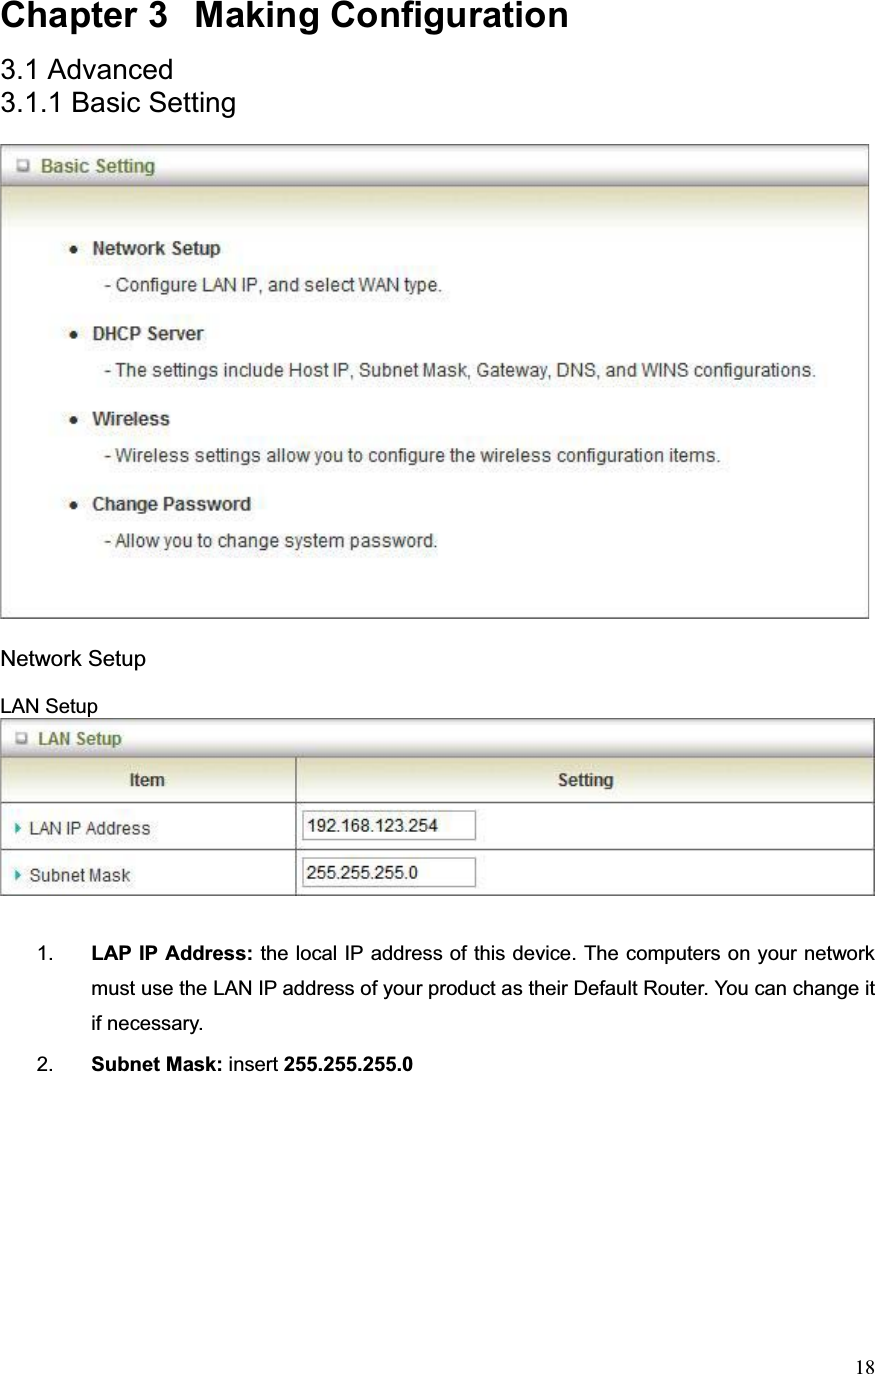 18Chapter 3  Making Configuration 3.1 Advanced 3.1.1 Basic Setting Network Setup LAN Setup 1. LAP IP Address: the local IP address of this device. The computers on your network must use the LAN IP address of your product as their Default Router. You can change it if necessary. 2. Subnet Mask: insert 255.255.255.0   